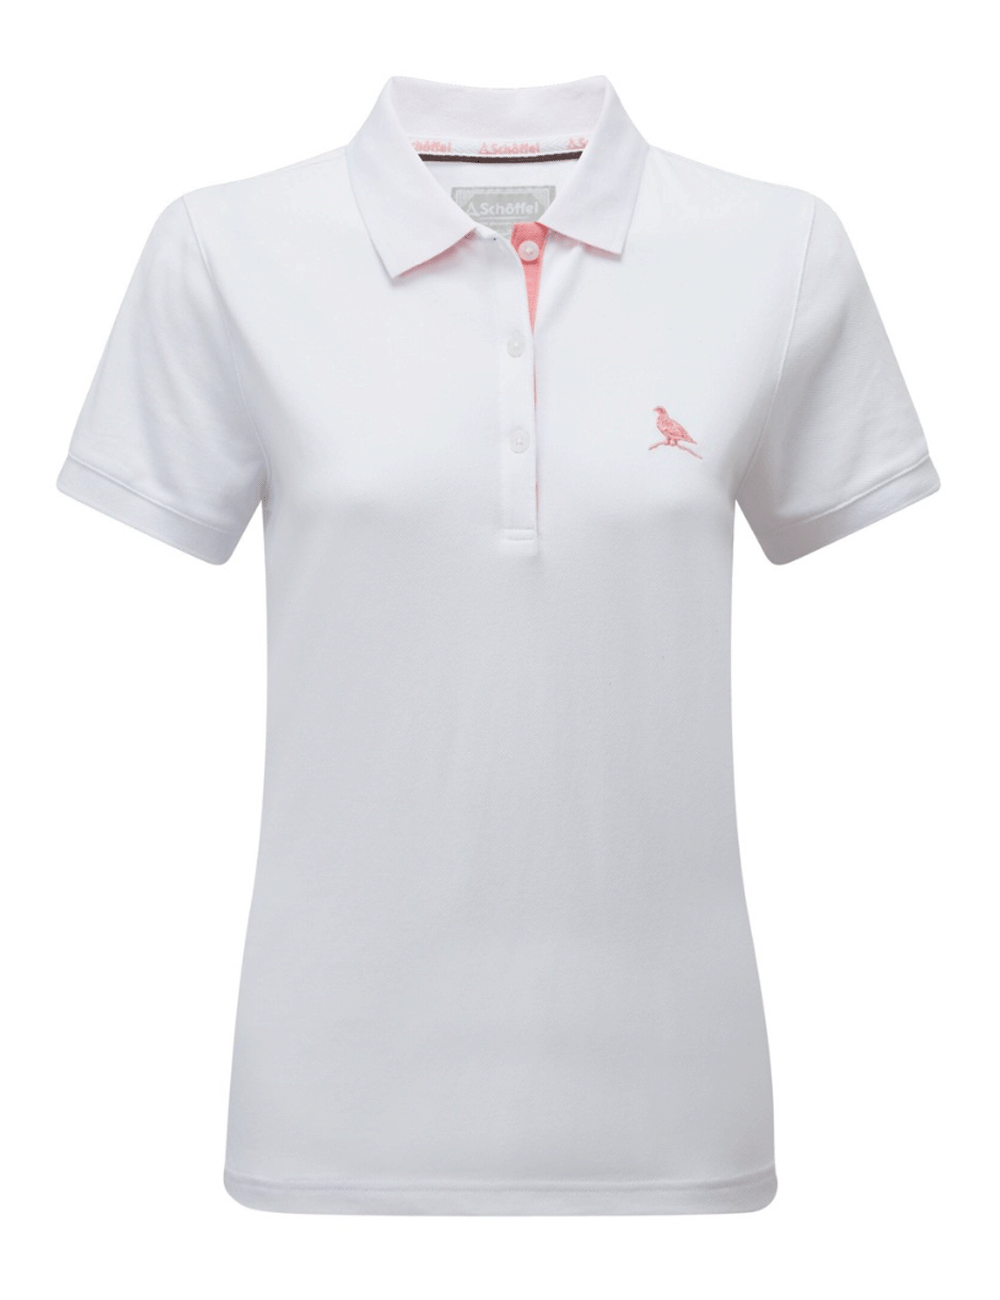 Schoffel's St. Ives Polo Shirt in White on a white background